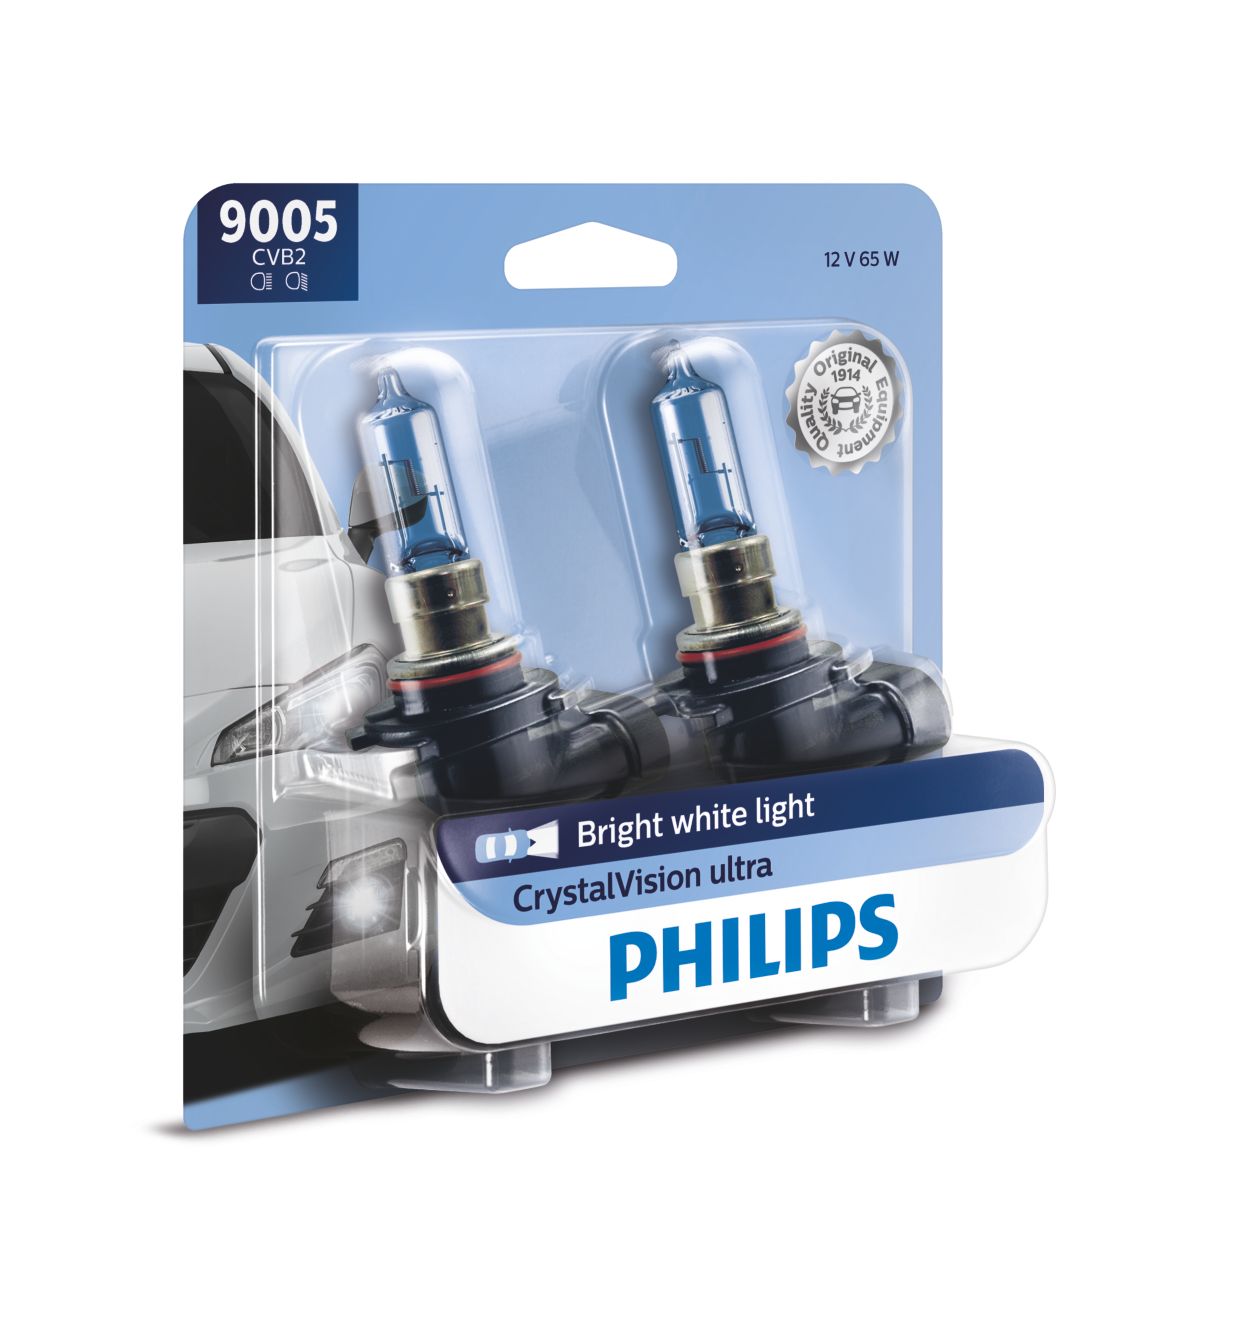 Philips Automotive Lighting H7 Standard Halogen Replacement Headlight Bulb,  2 Pack, white